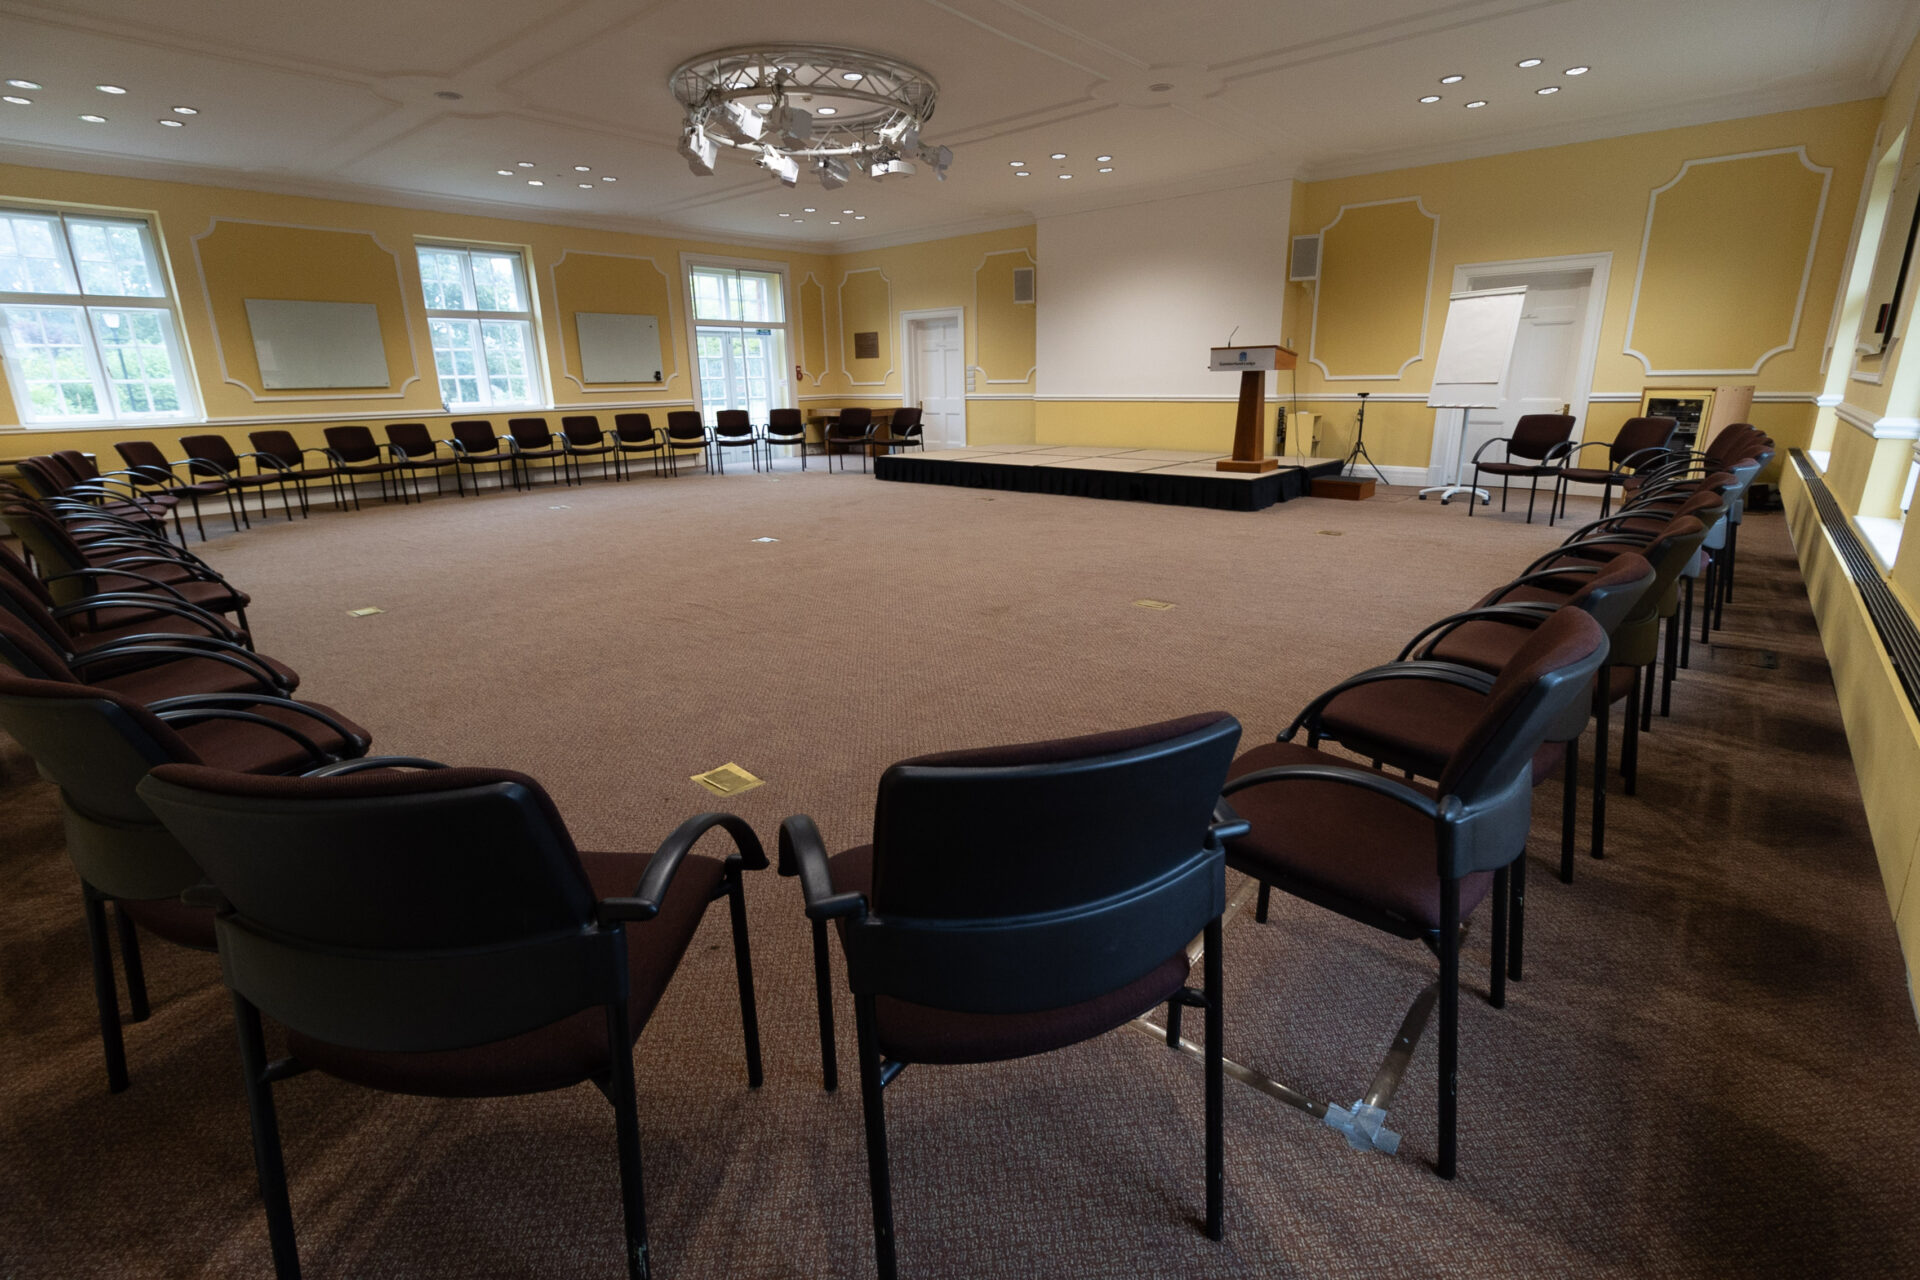 The Flitcroft conference room, set up to accommodate up to 40 people in a semi-circle.